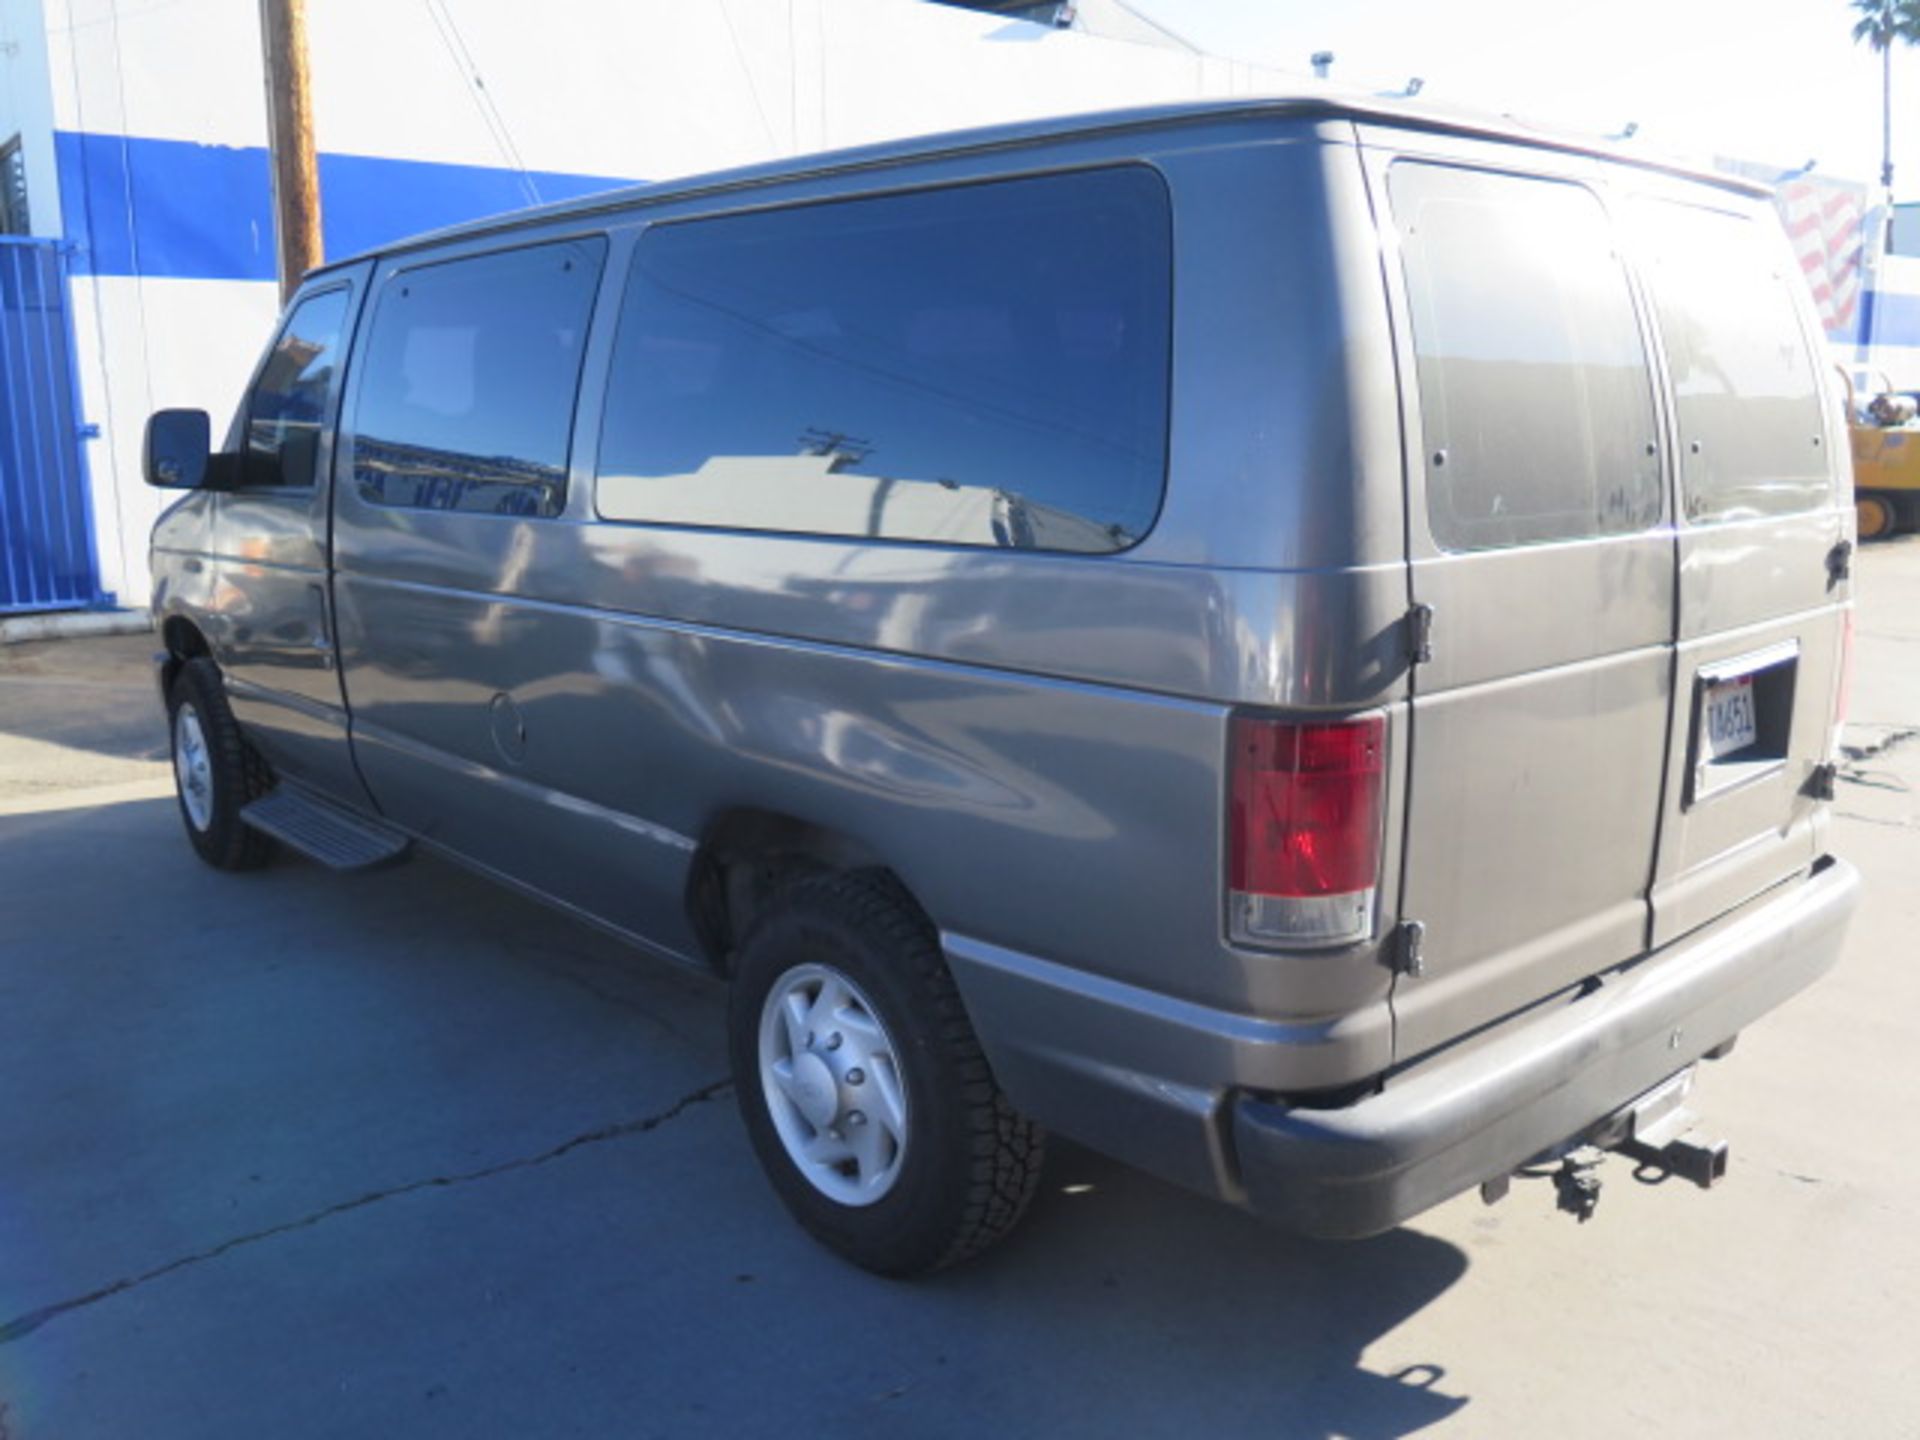 2009 Ford E-Series 11-Passanger Van Lisc# 6GTA651 w/ Gas Engine, Automatic Trans, AC, CD, 110,811 - Image 4 of 15